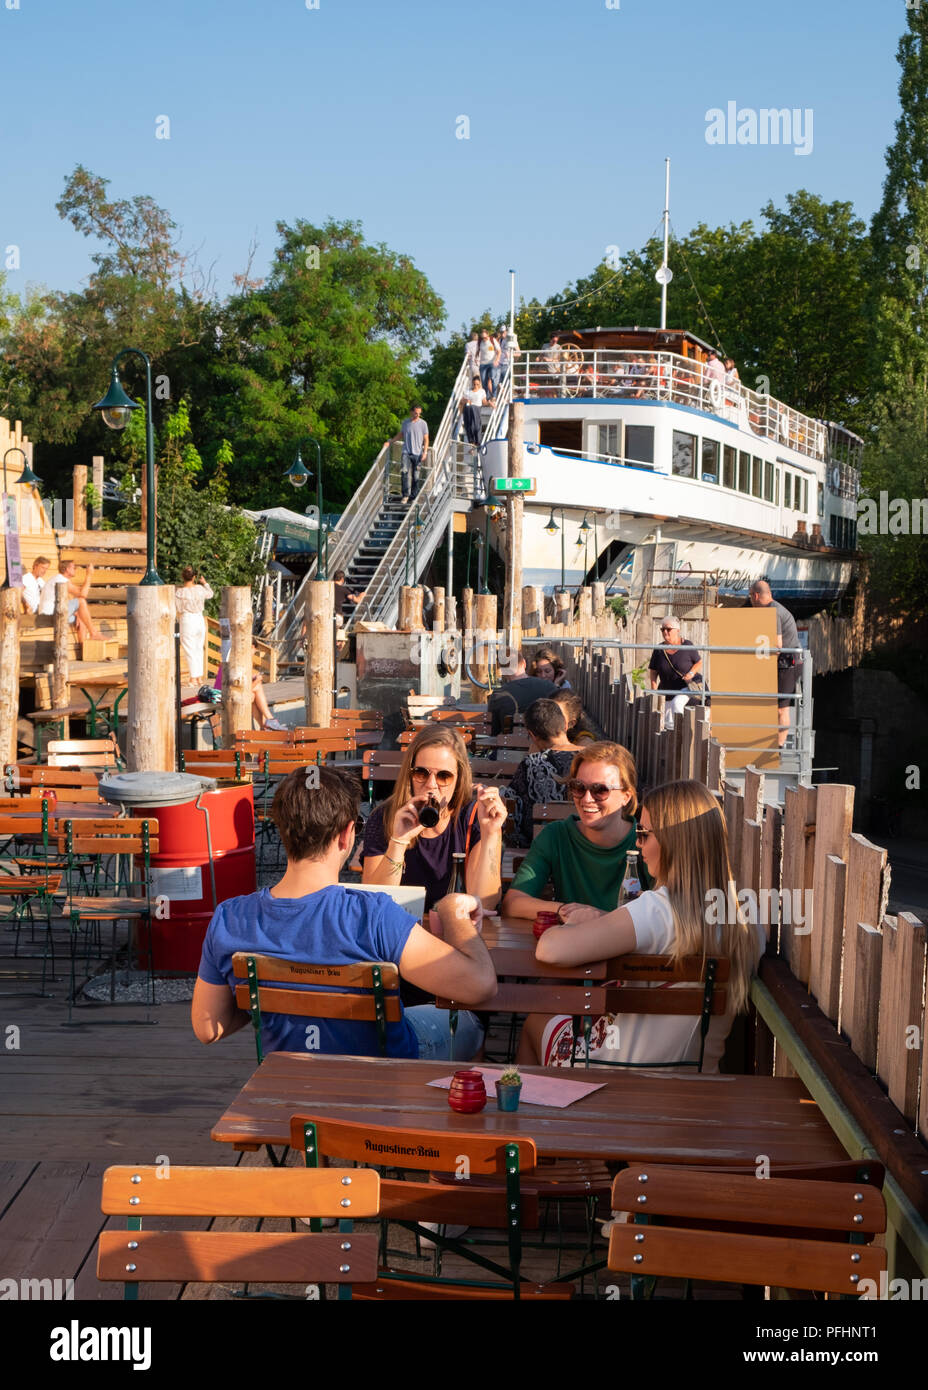 Alte Utting, former  passenger ship converted to a restaurant now placed on a railway bridge in Munich,Germany. Stock Photo